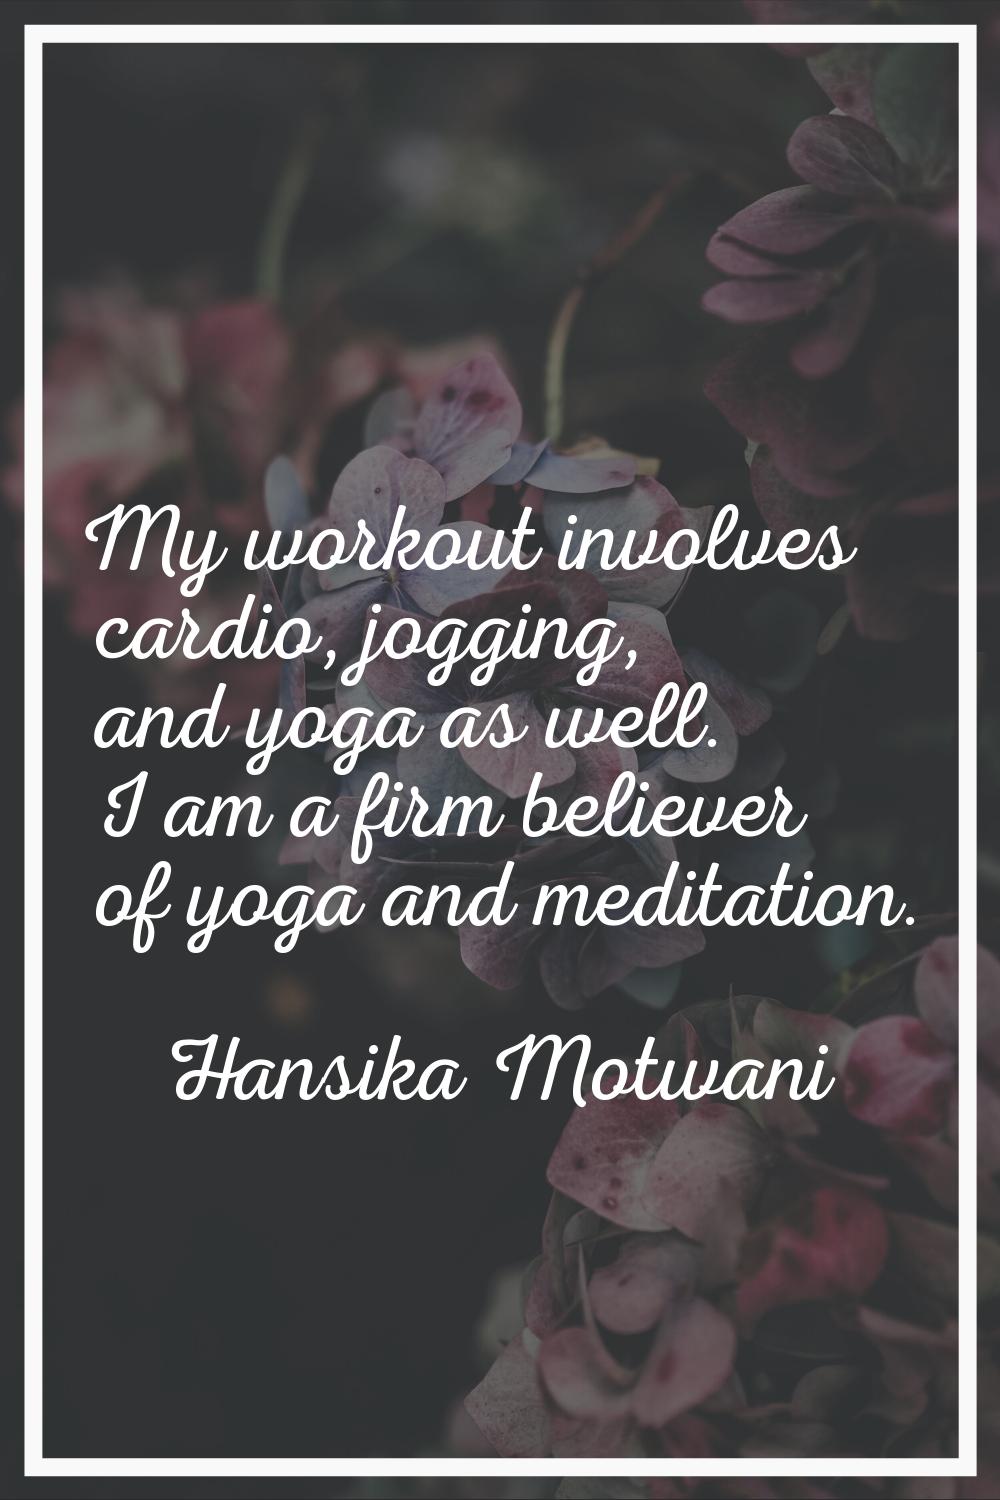 My workout involves cardio, jogging, and yoga as well. I am a firm believer of yoga and meditation.